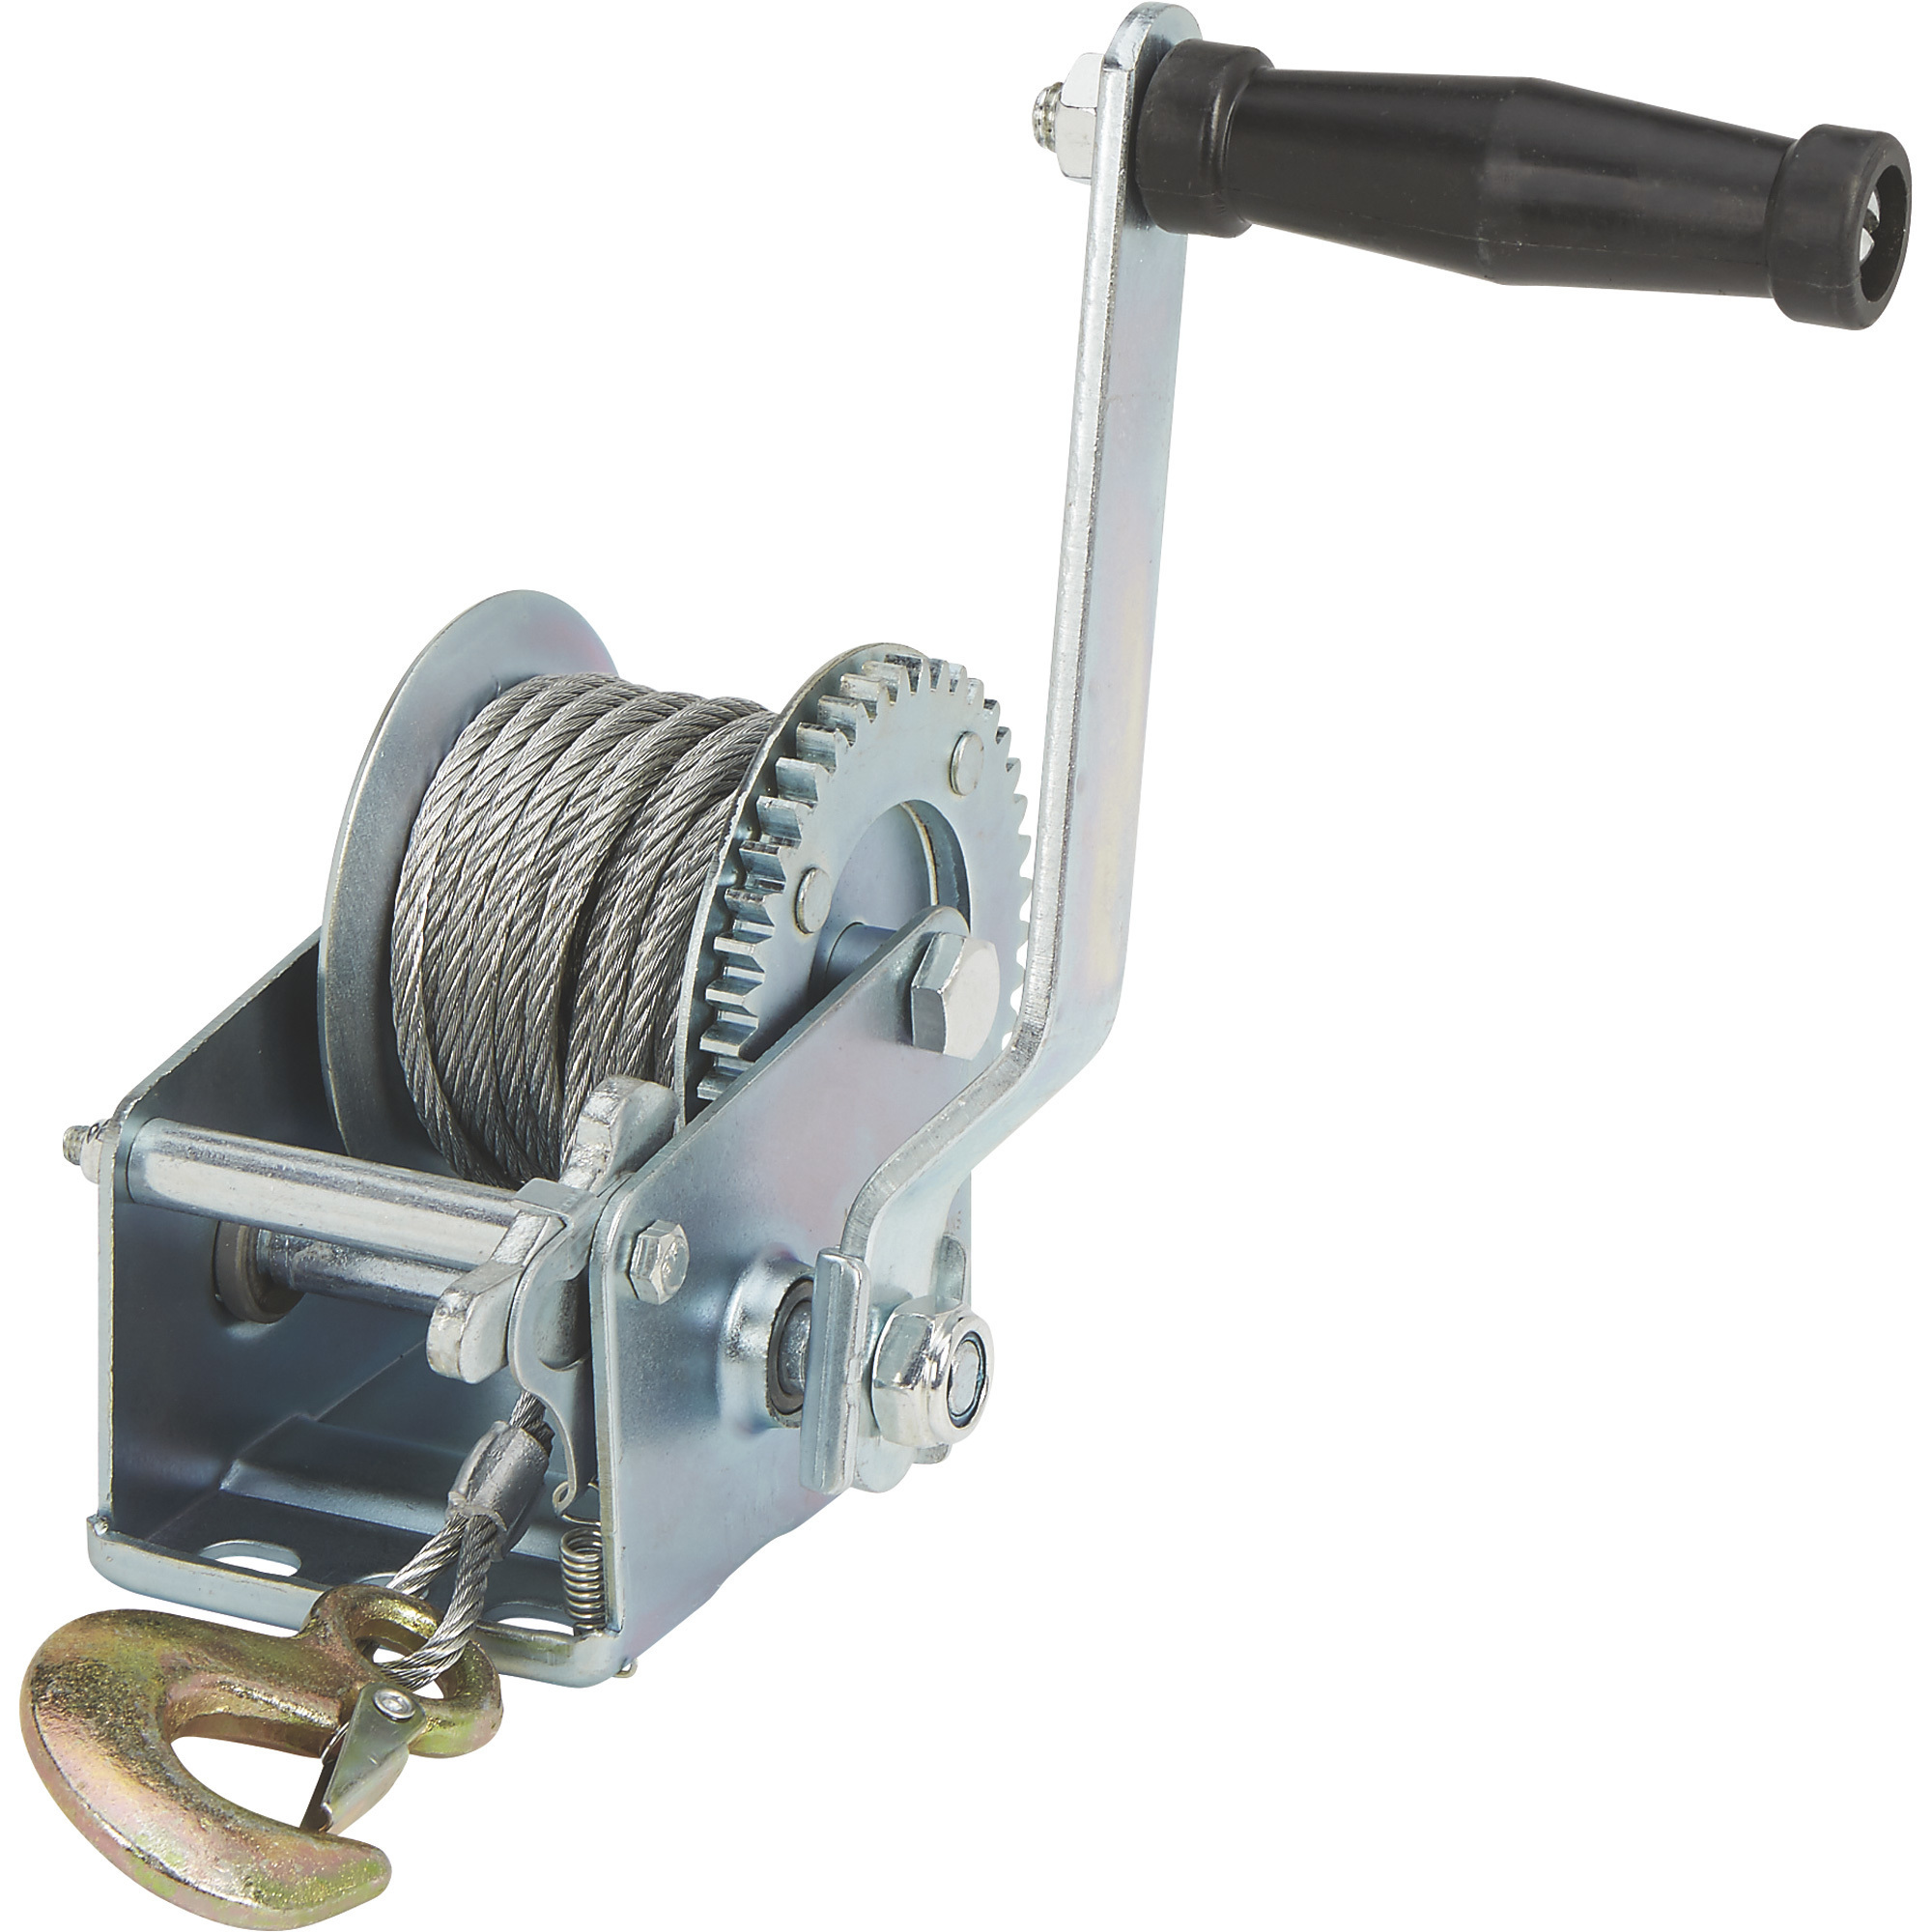 Ultra-Tow Single Speed Hand Winch with Wire Rope, 600-Lb. Load Capacity, 21ft. Rope